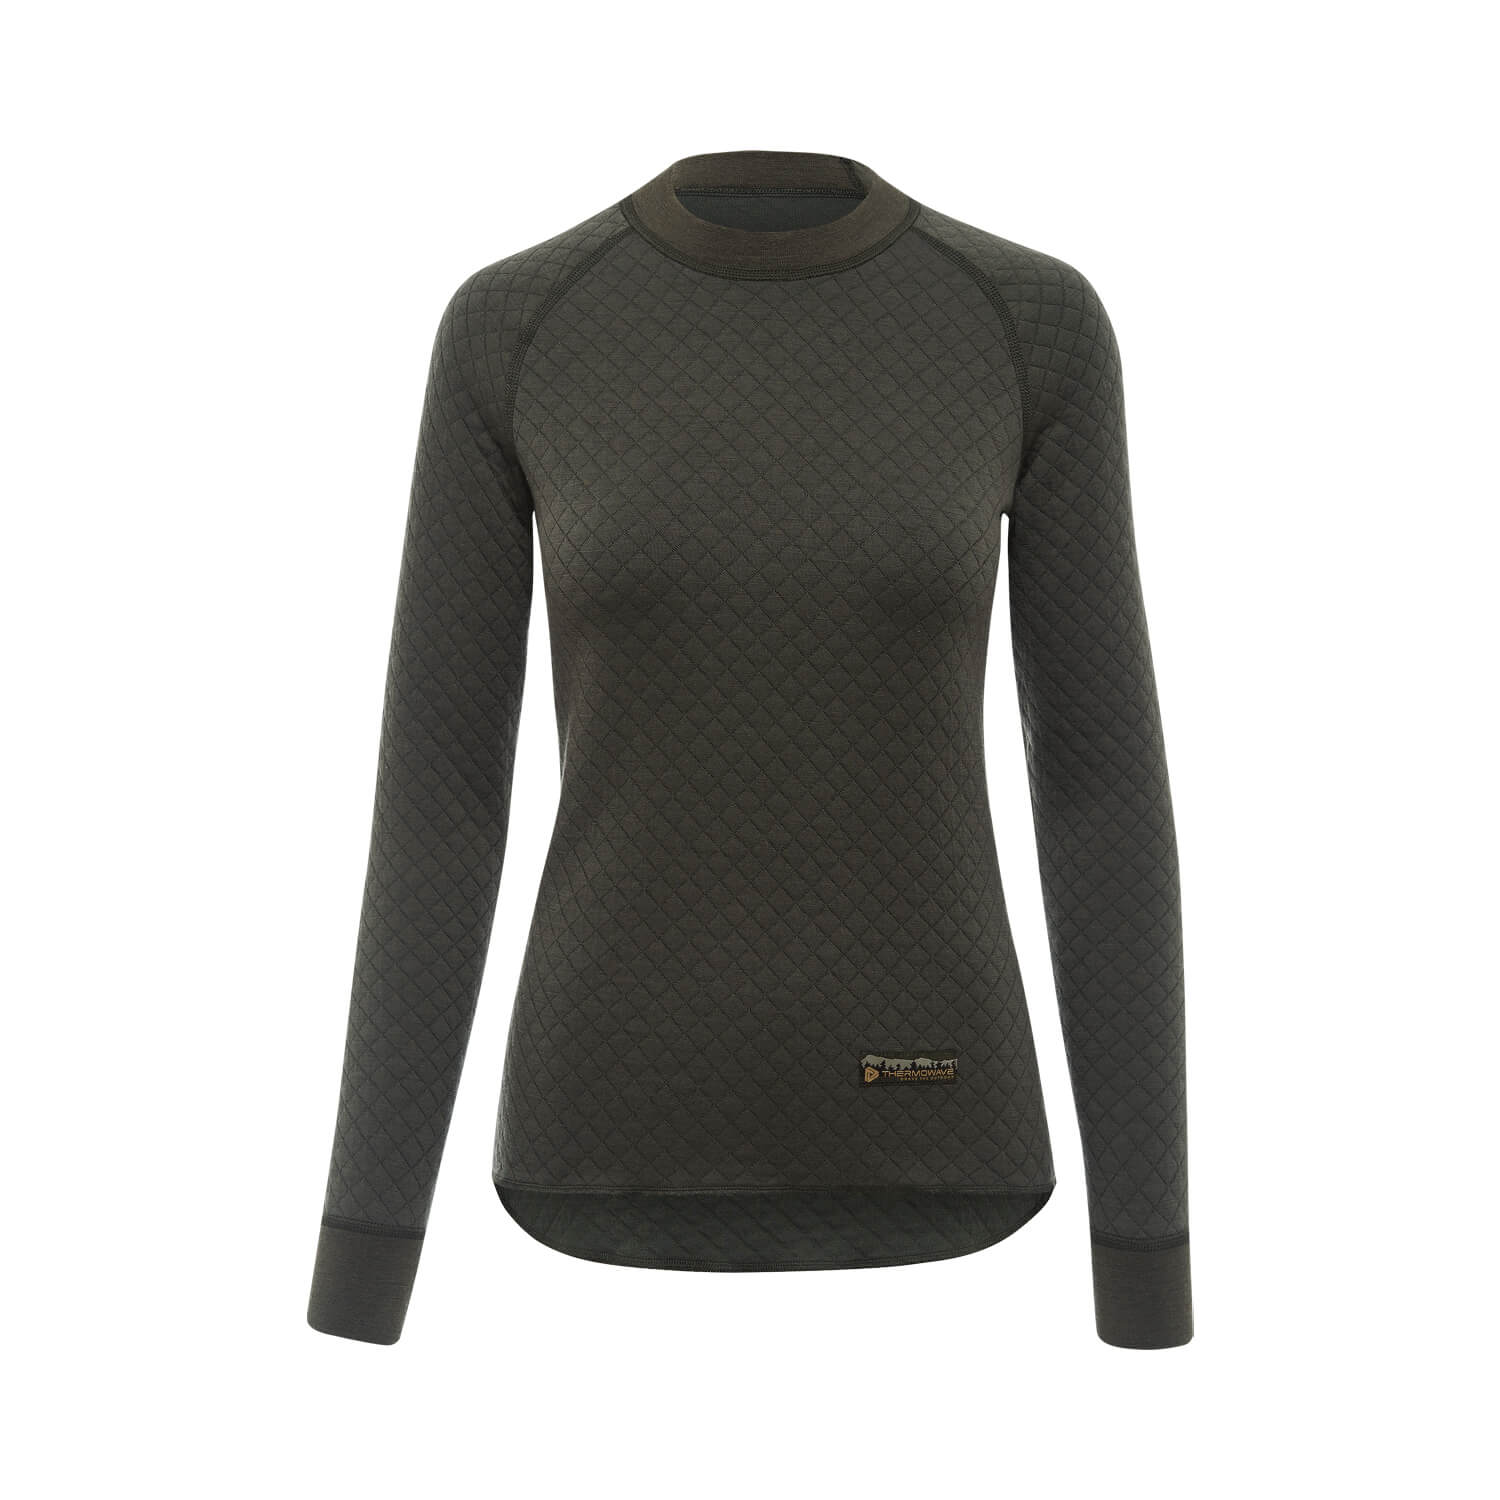 Thermowave Damen-Langarmshirt 3in1 - Thermowave